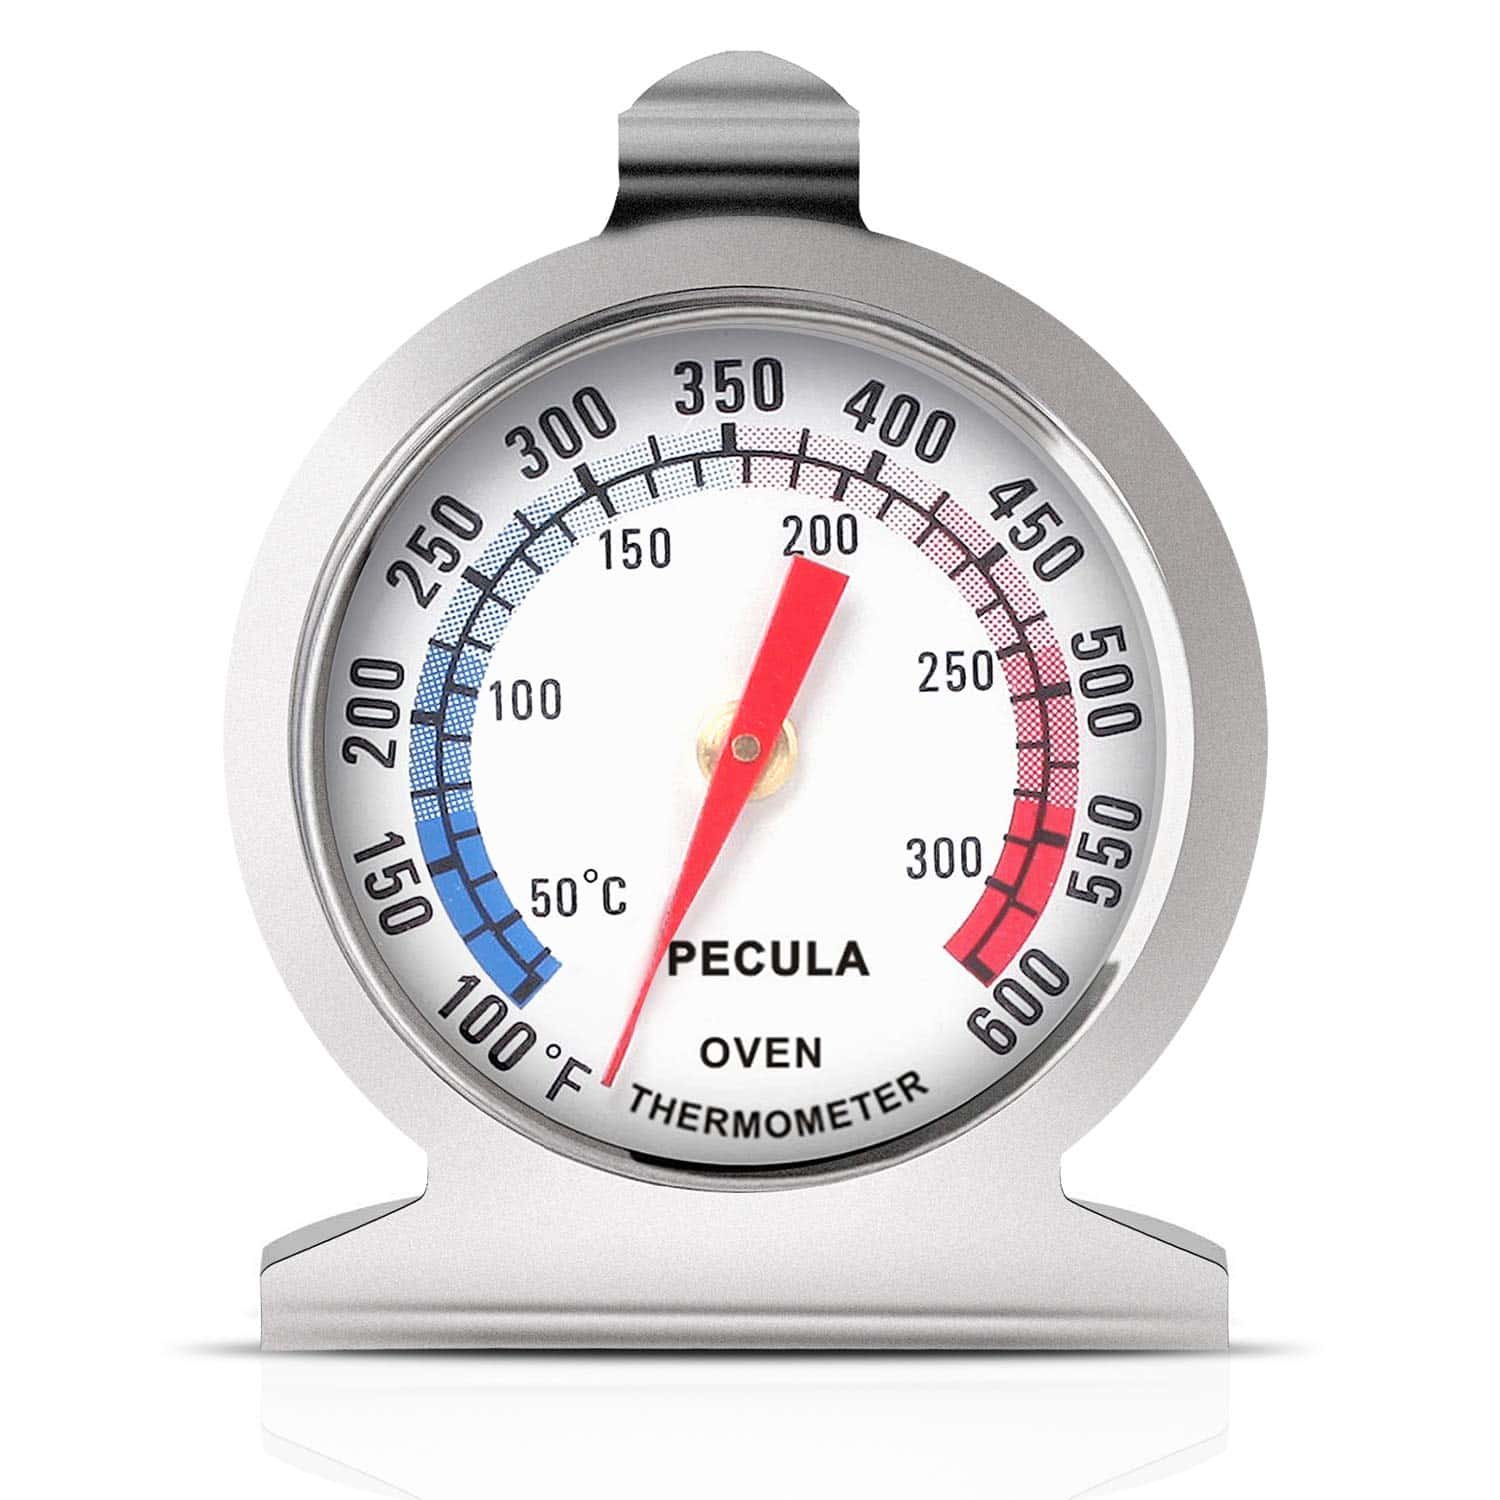 RV oven thermometer